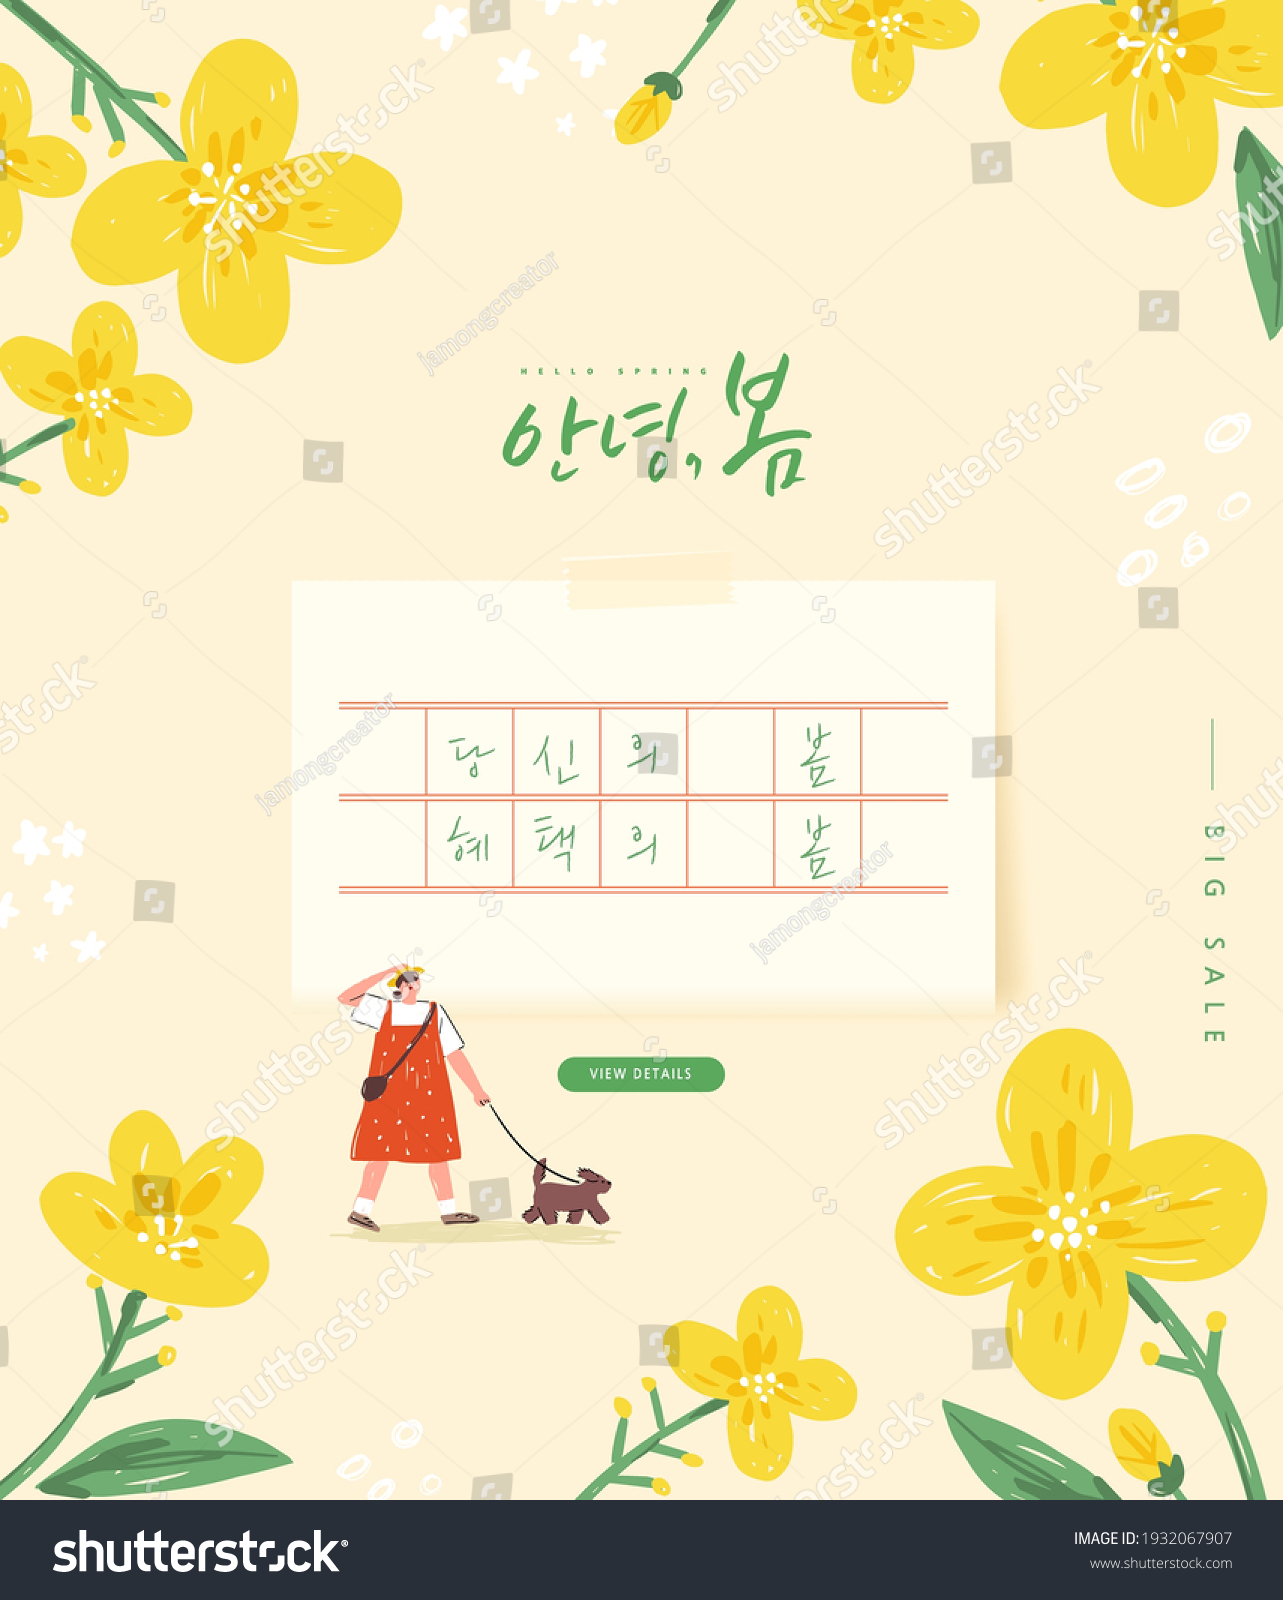 Spring sale template with beautiful flower. Vector illustration.  Korean Translation: "Hello Spring", "Your spring" , "Spring of Benefit"
 #1932067907